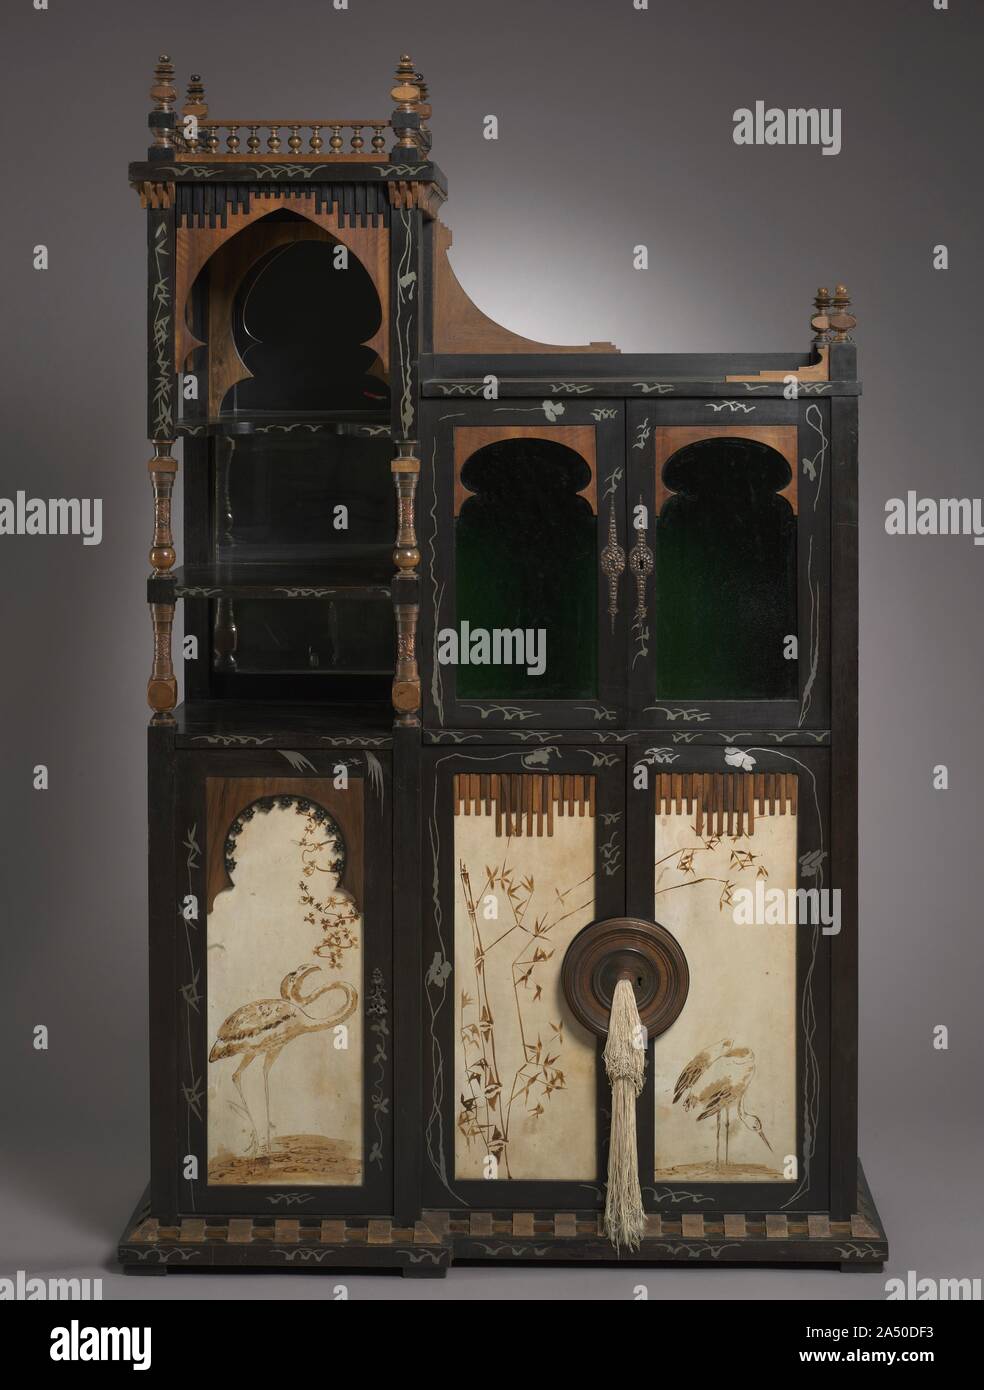 Cabinet, c. 1895. This cabinet is typical Bugatti. In form it is asymmetrical, with a towerlike element at one side. There are Islamic-inspired ornaments in its design, notably the onion-shaped arches in the upper stage. Japanese influence is evident in the white metal inlays and, even more clearly, in the sepia-painted parchment panels in the lower portion of the cabinet. One of these, at the bottom left, is signed &quot;Casati.&quot; No contemporary painter with this name has been discovered, but the Marchesa Luisa Casati, a well-known socialite in Milan, is known to have been an acquaintanc Stock Photo